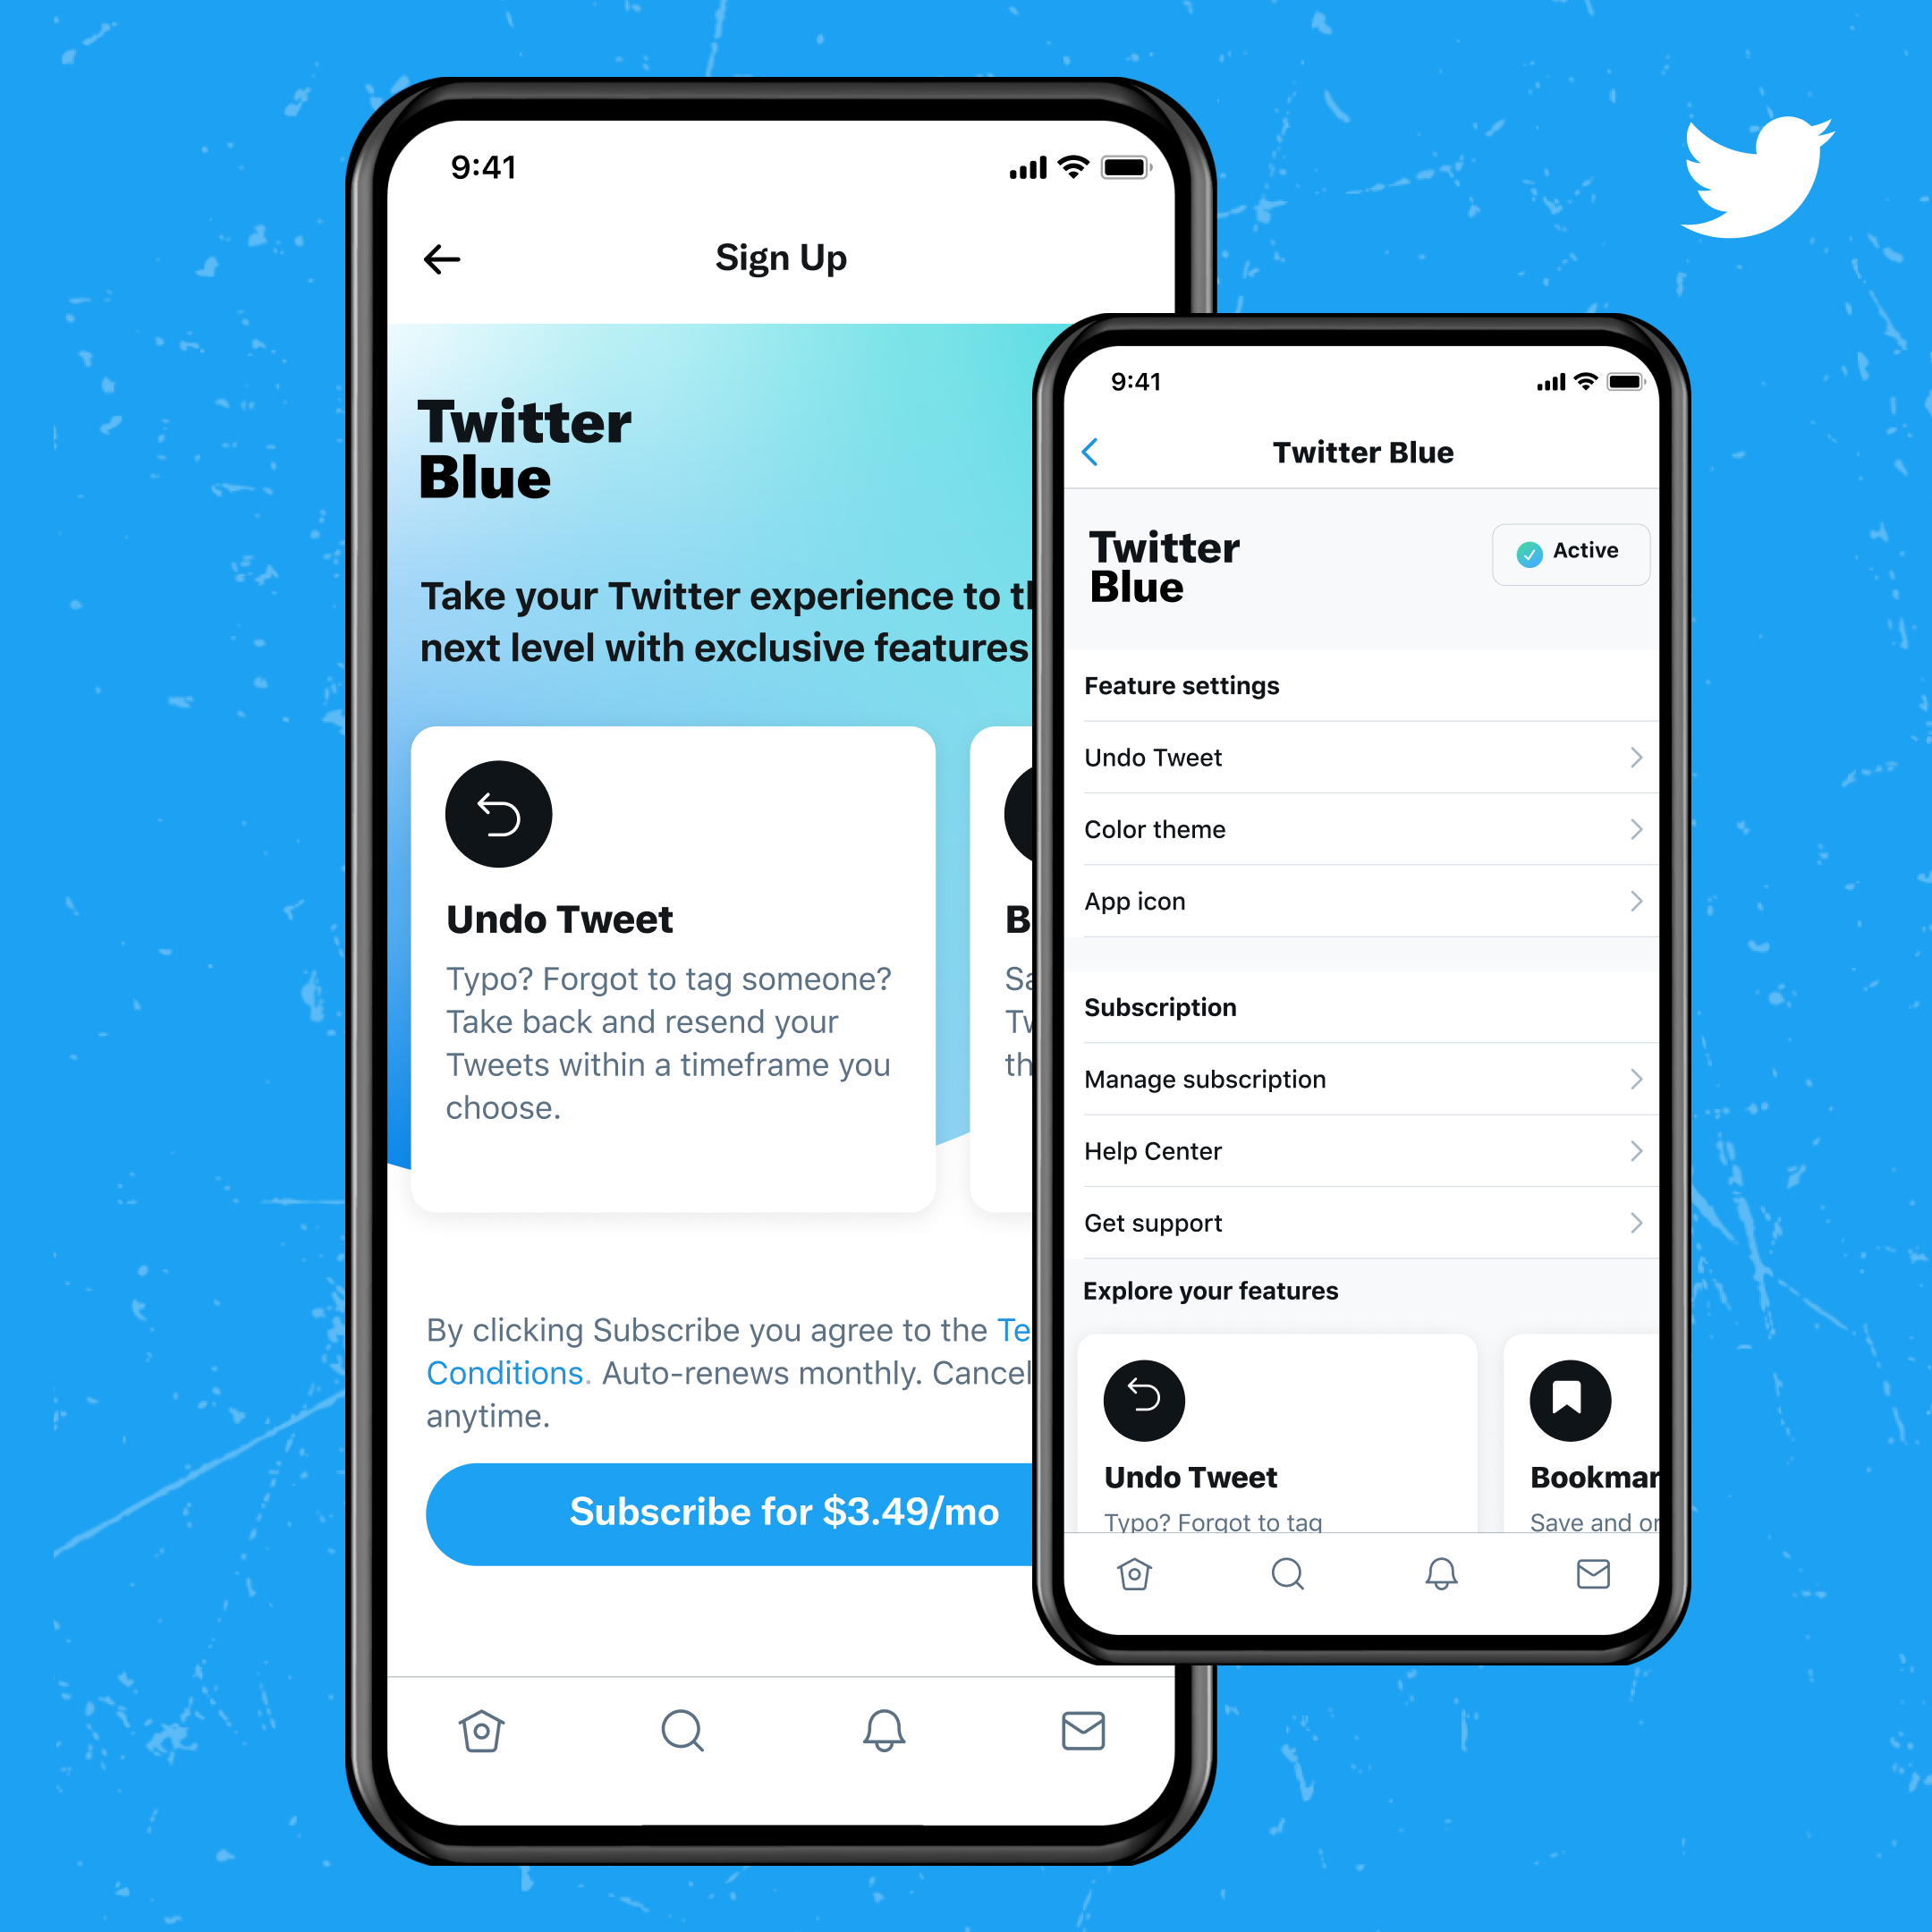 How to mute retweets from everyone on Twitter (with screenshots)